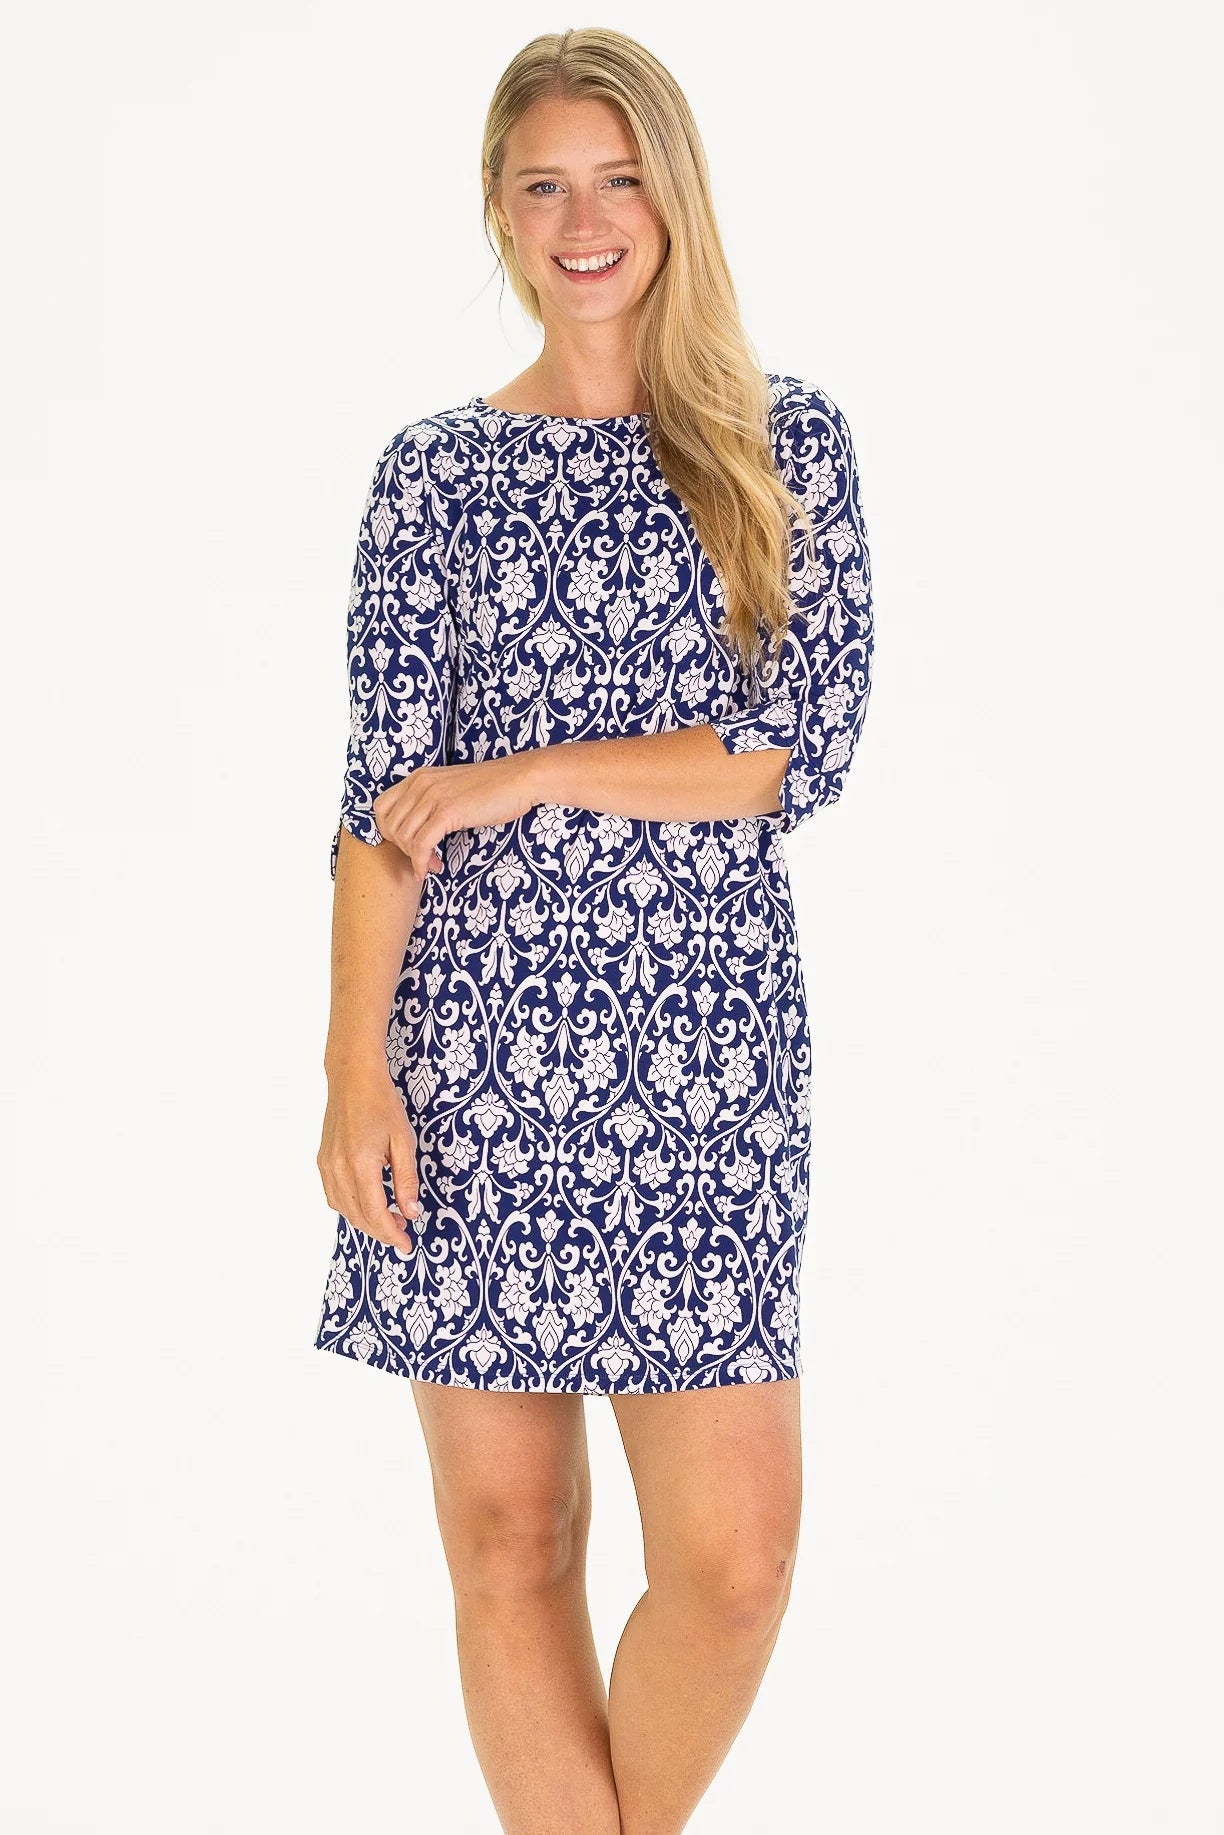 The Alicia Dress in Navy Filigree by Duffield Lane